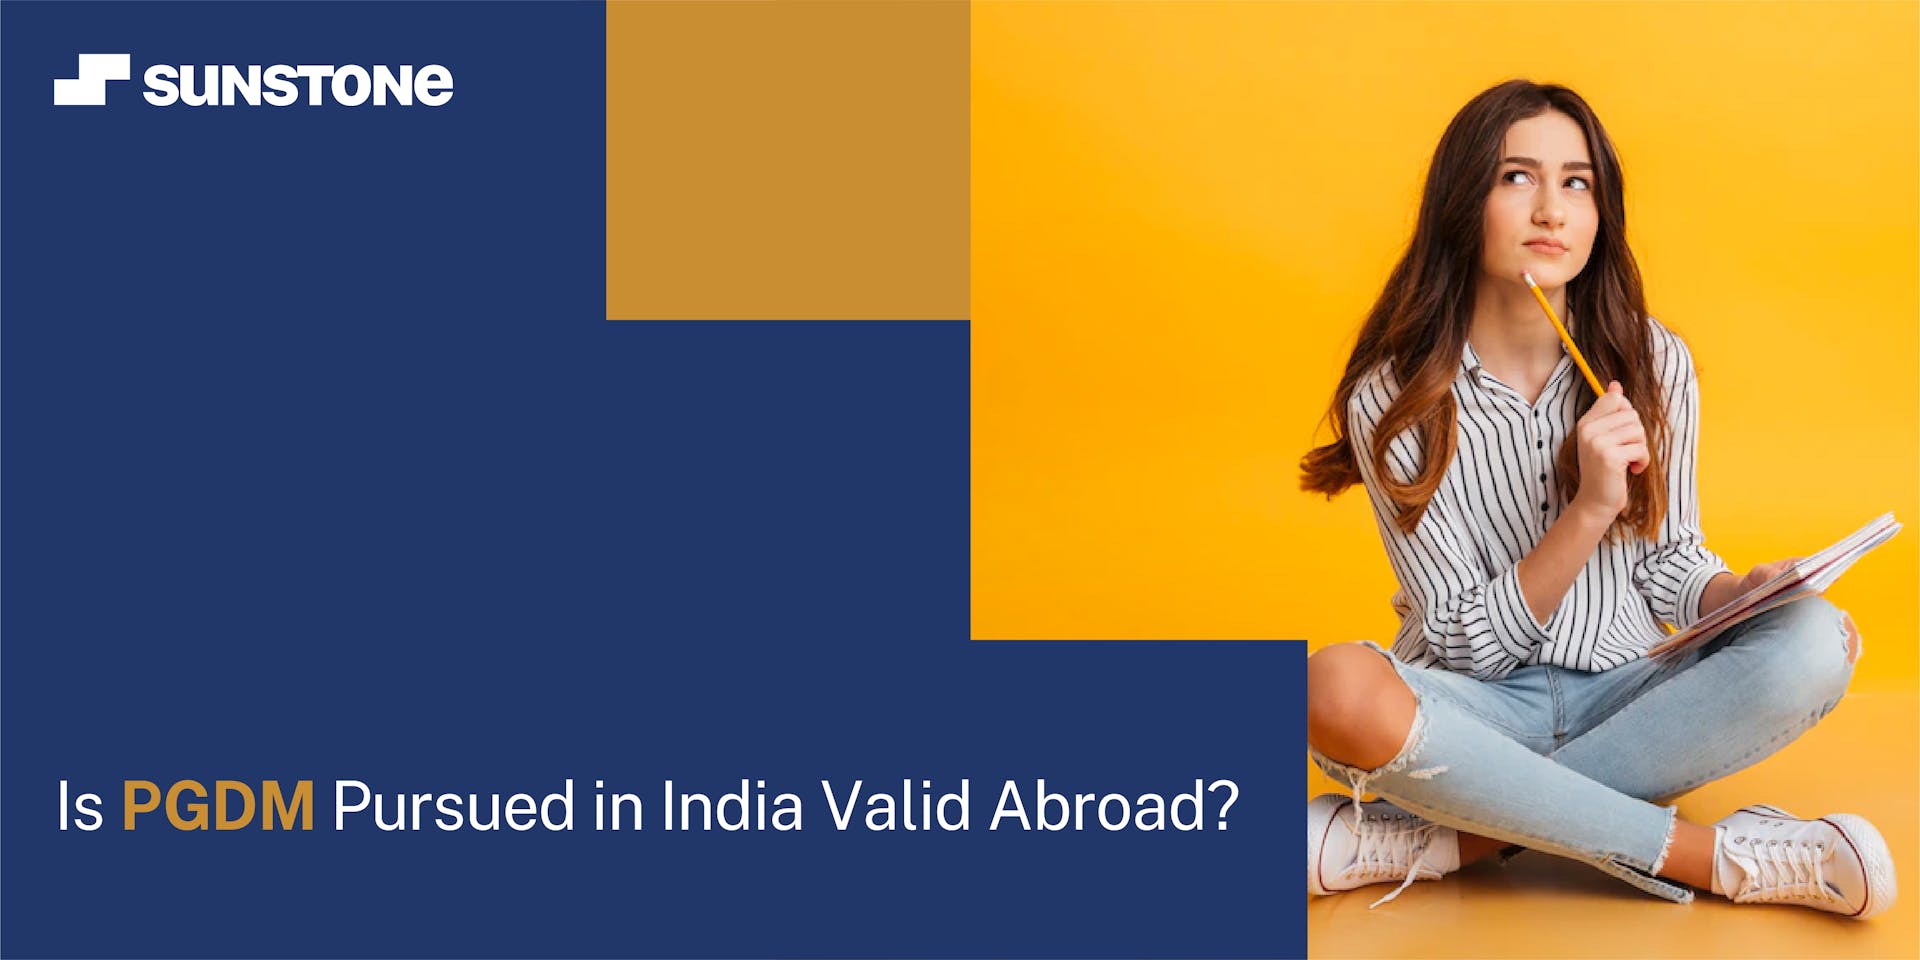 Is PGDM Pursued in India Valid Abroad?